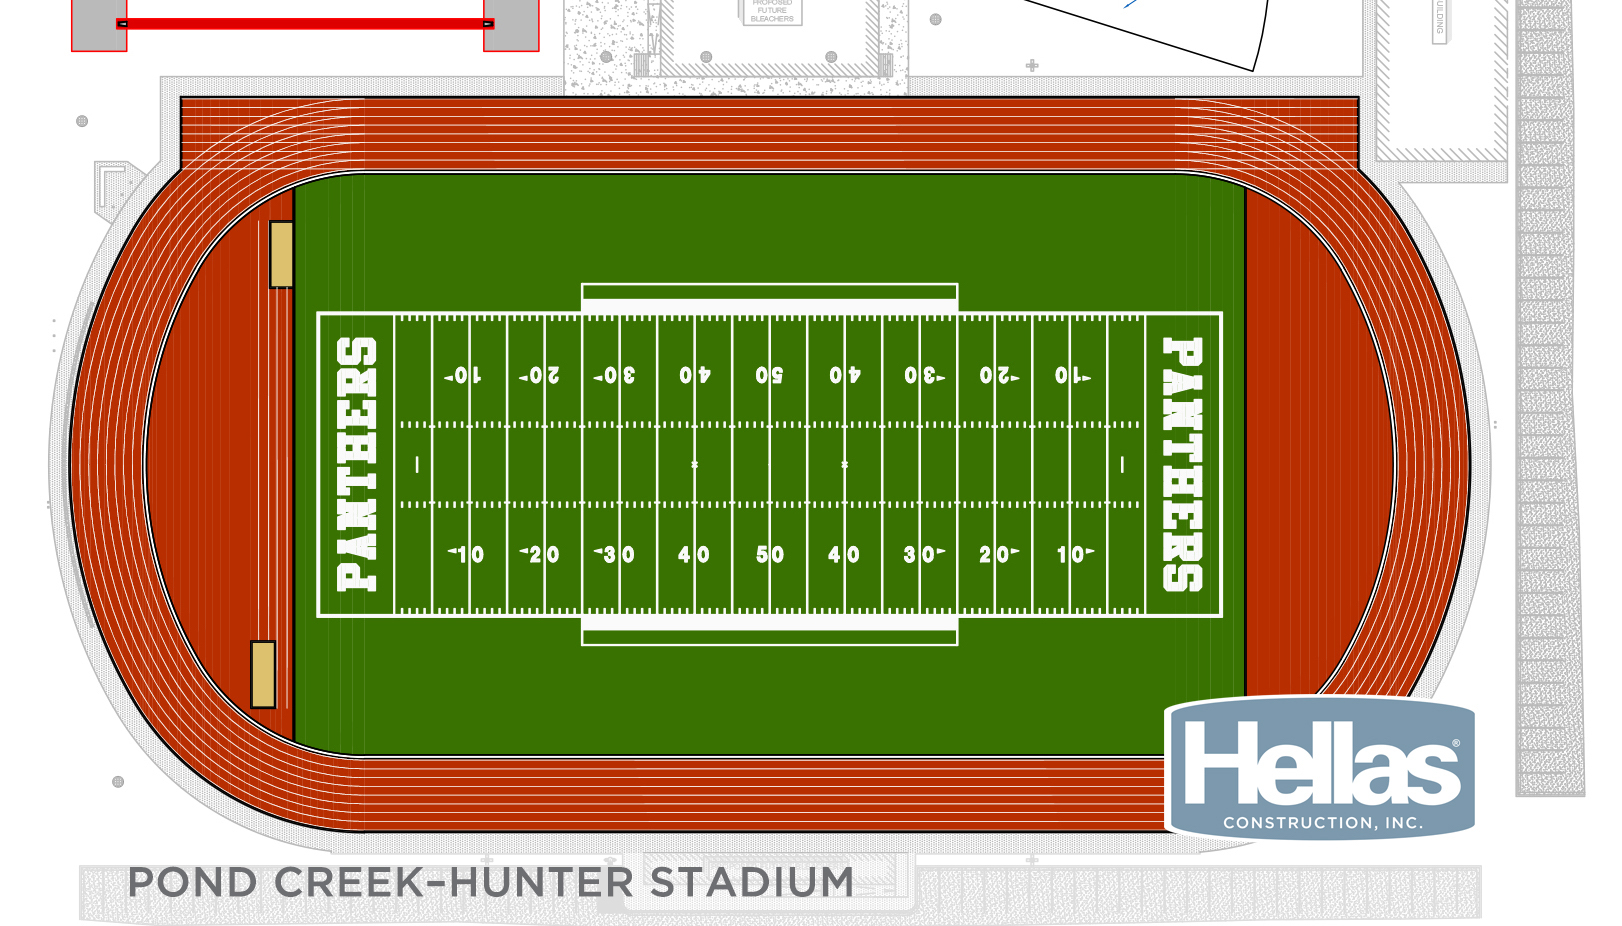 Proposed rendering of the new Pond Creek-Hunter Stadium layout with the new epiQ Tracks®V300 track system and Matrix® Turf with Helix Technology.